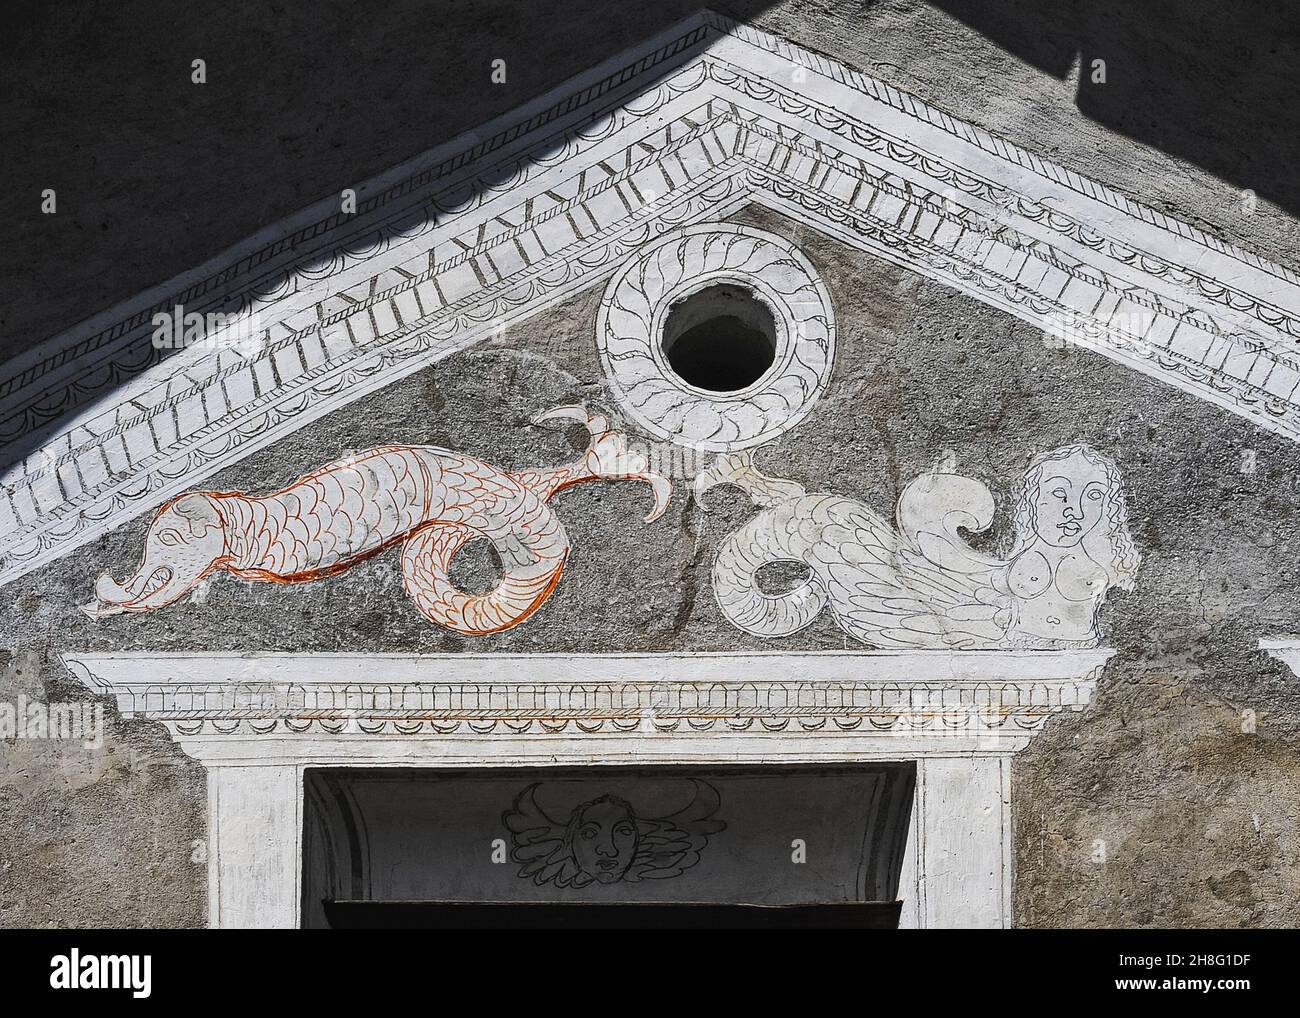 A buxom mermaid reclines beside a scaly sea monster with a forked tail and an arrowhead tongue in eye-catching rustic sgraffito art on the front of a restored traditional family house in Ardez, Graubünden or Grisons canton, eastern Switzerland.  Dragons, mermaids and sea creatures are found on many dwellings in the area restored by local sgraffito artists in the early 1900s. Stock Photo